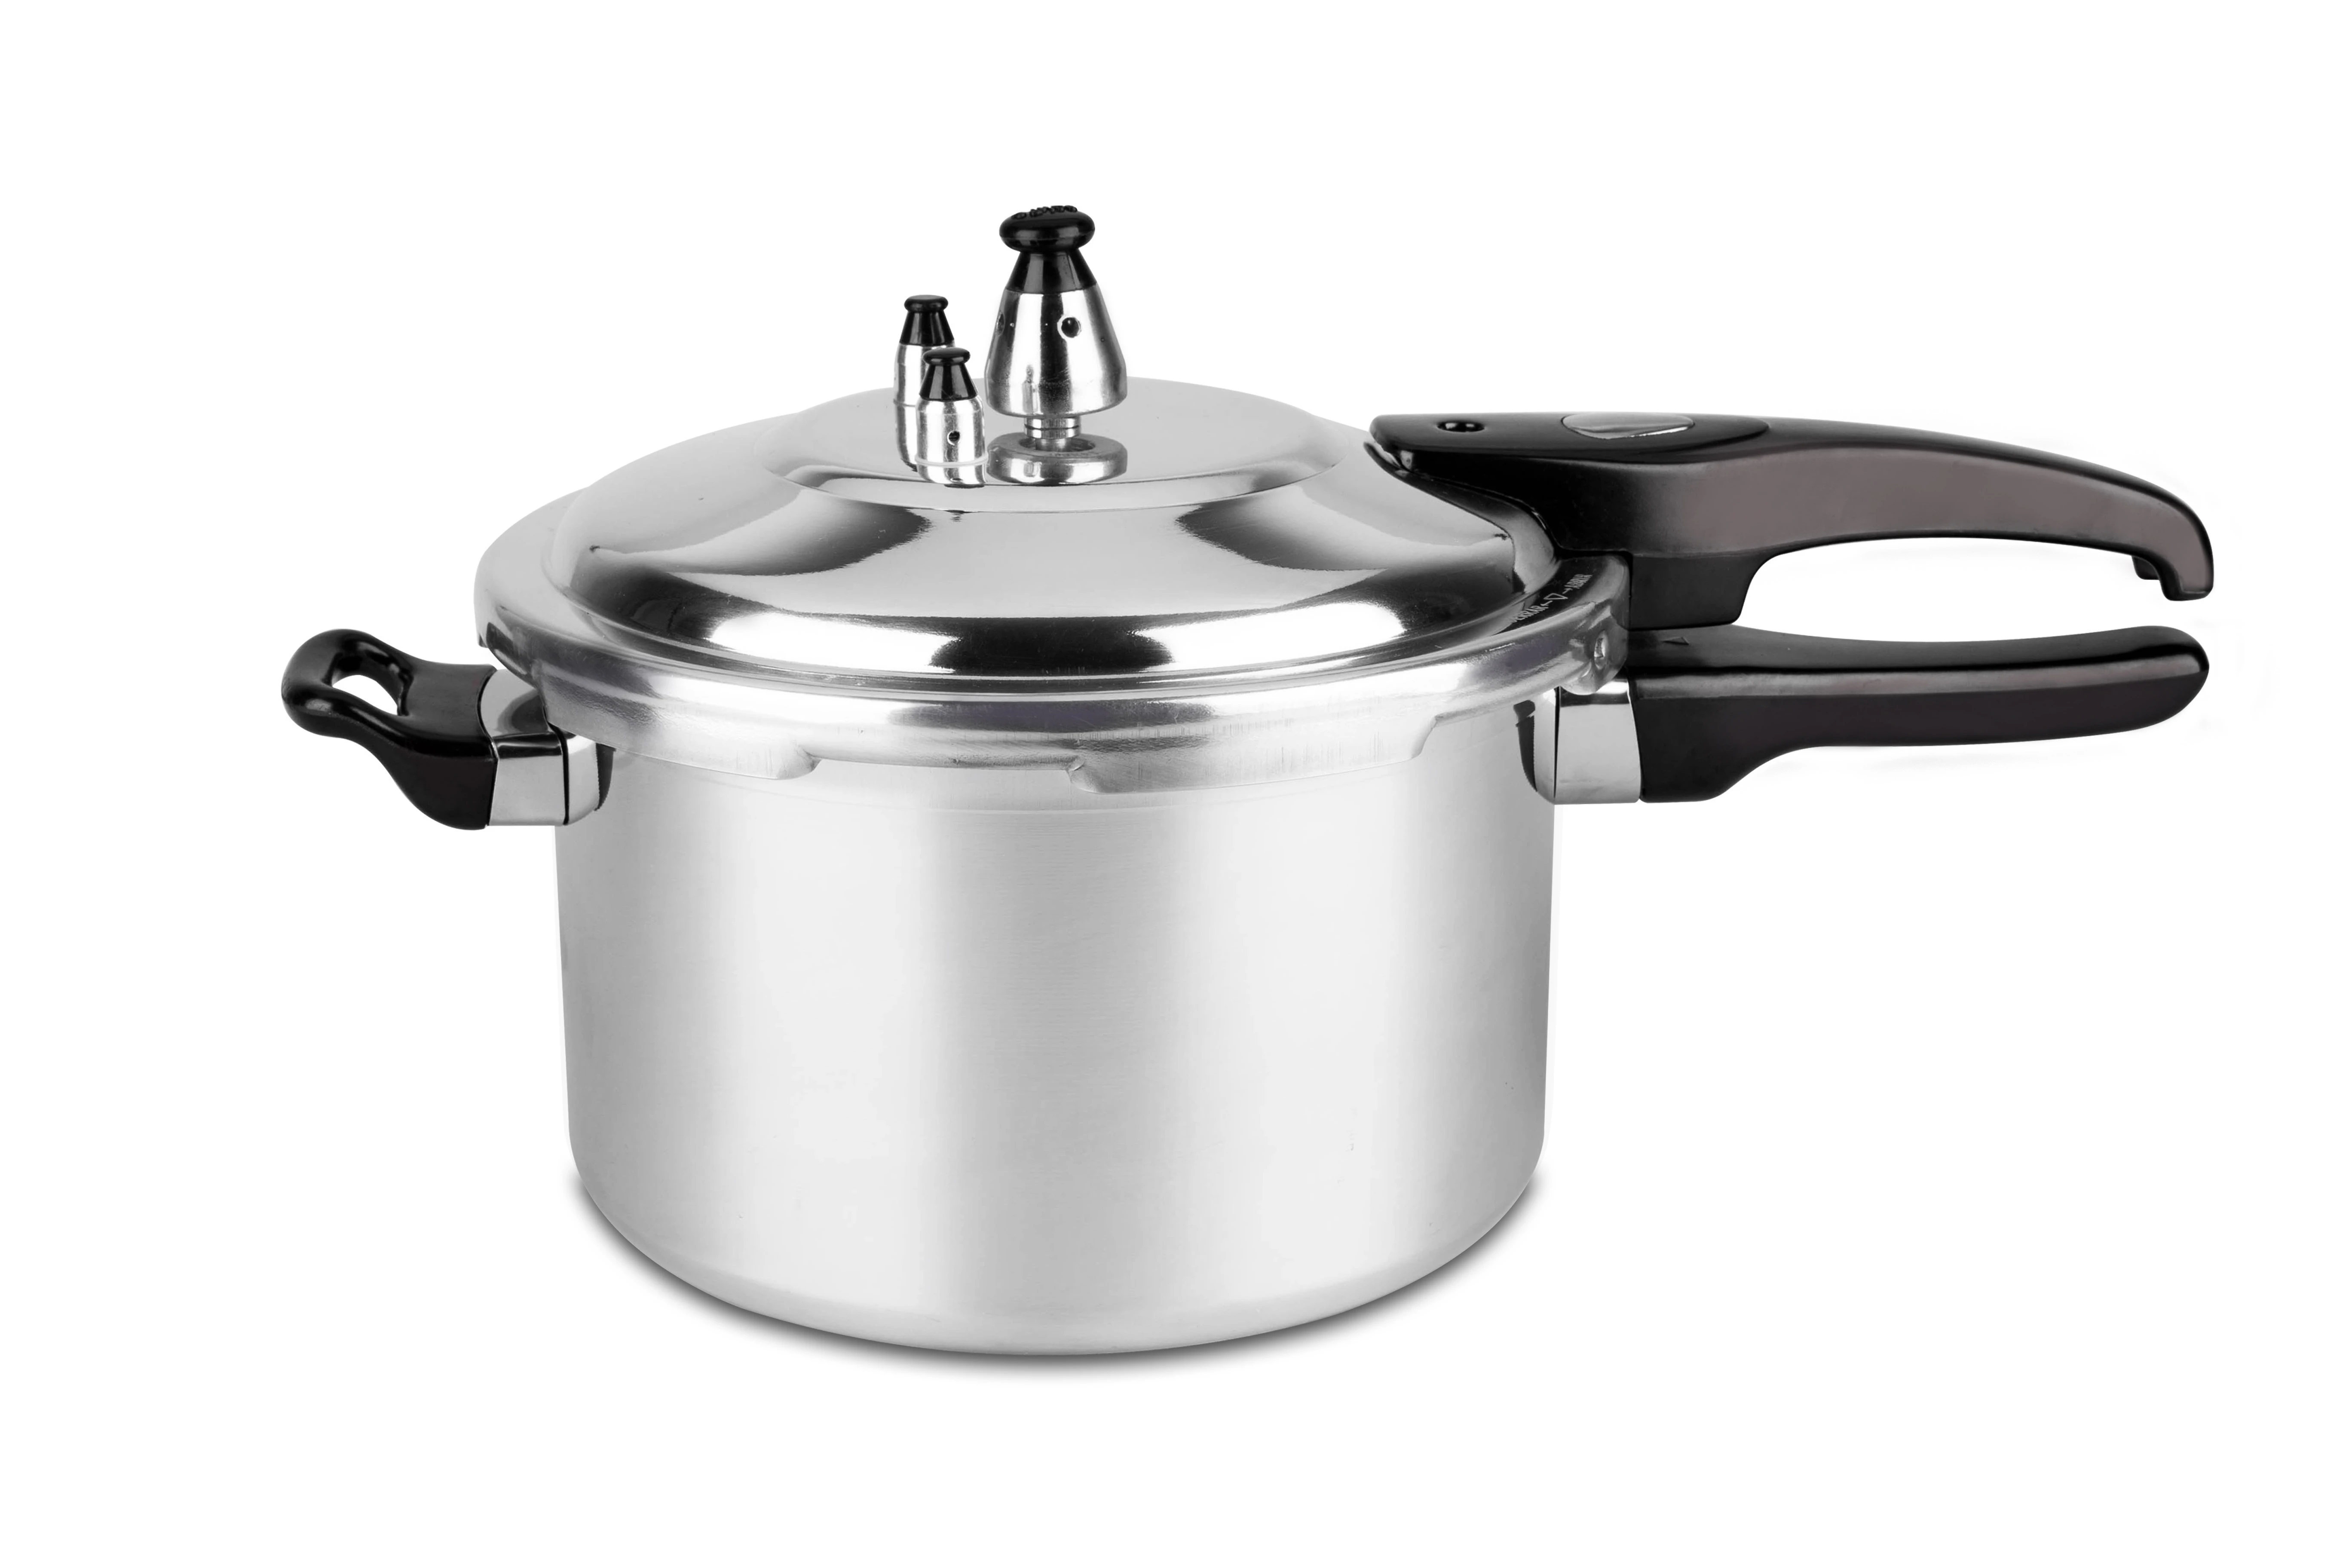 3L 4L 5L 7L 9L 11L 13L Sizes Gas cooker with Multiple safety Multi used Outdoor Camping Aluminum alloy Gas pressure cooker